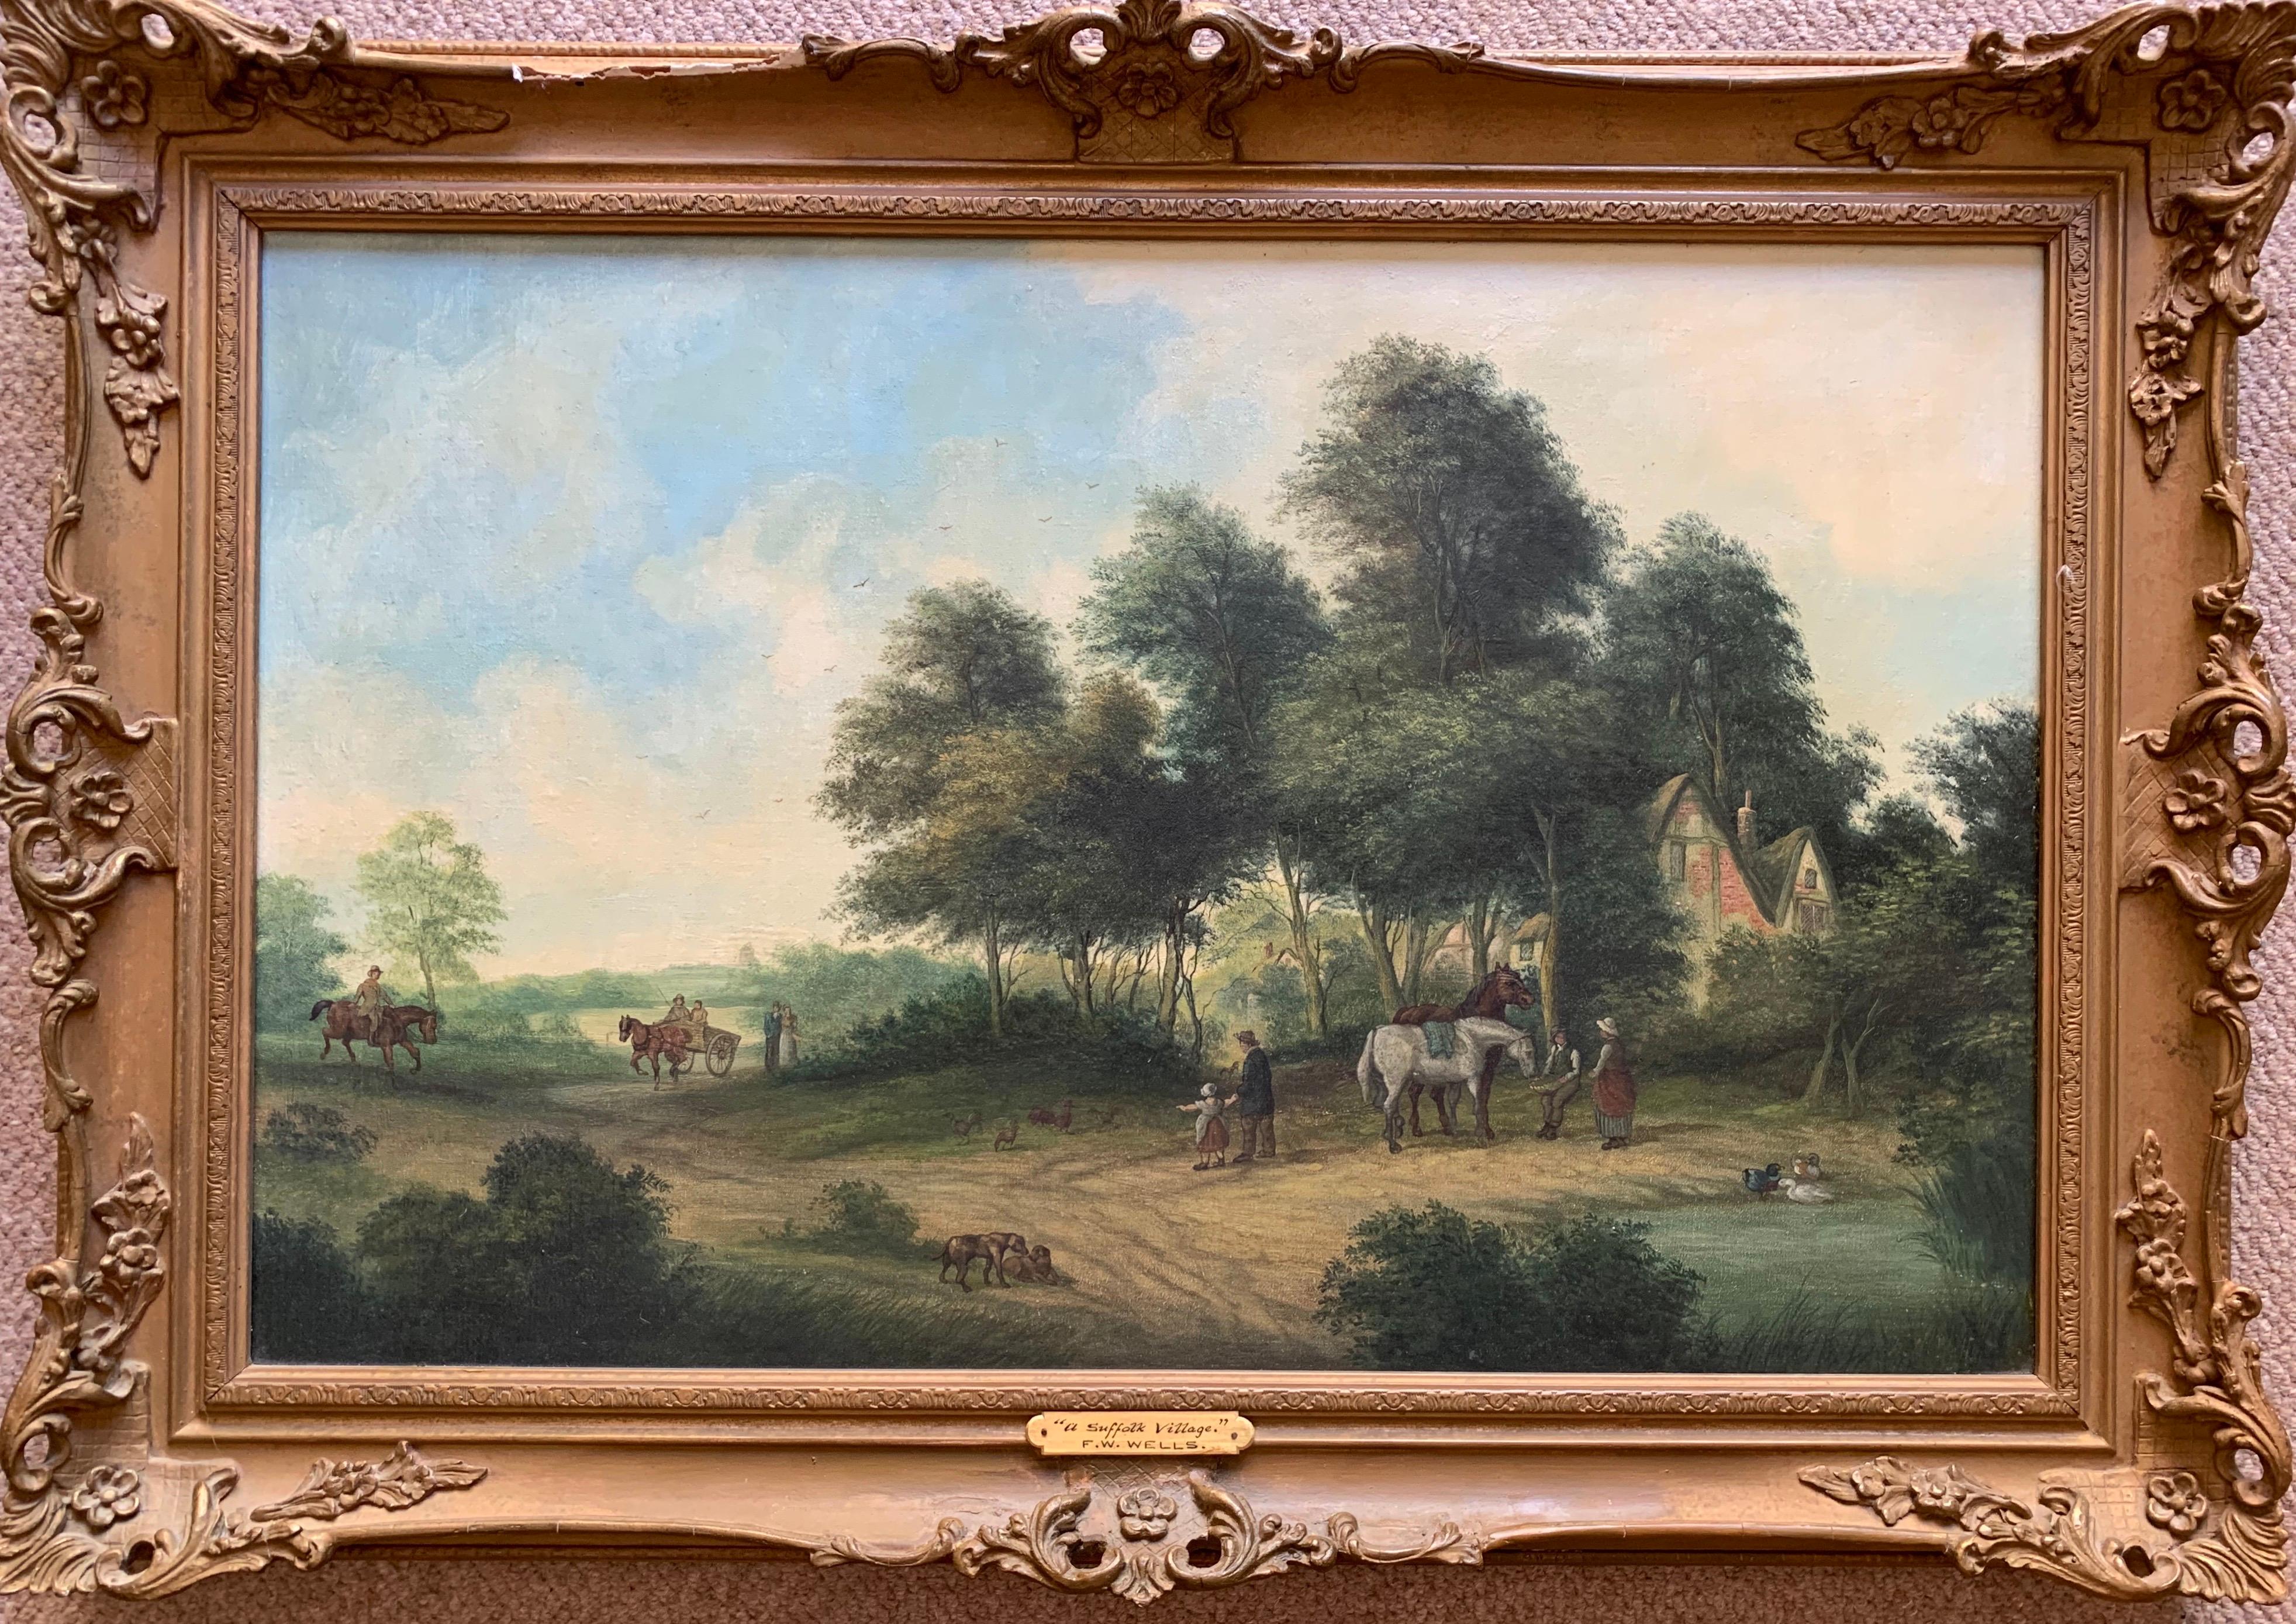 F. W. Wells Animal Painting - Victorian Oil Painting Horses & Figures in Suffolk Village Landscape & Ducks